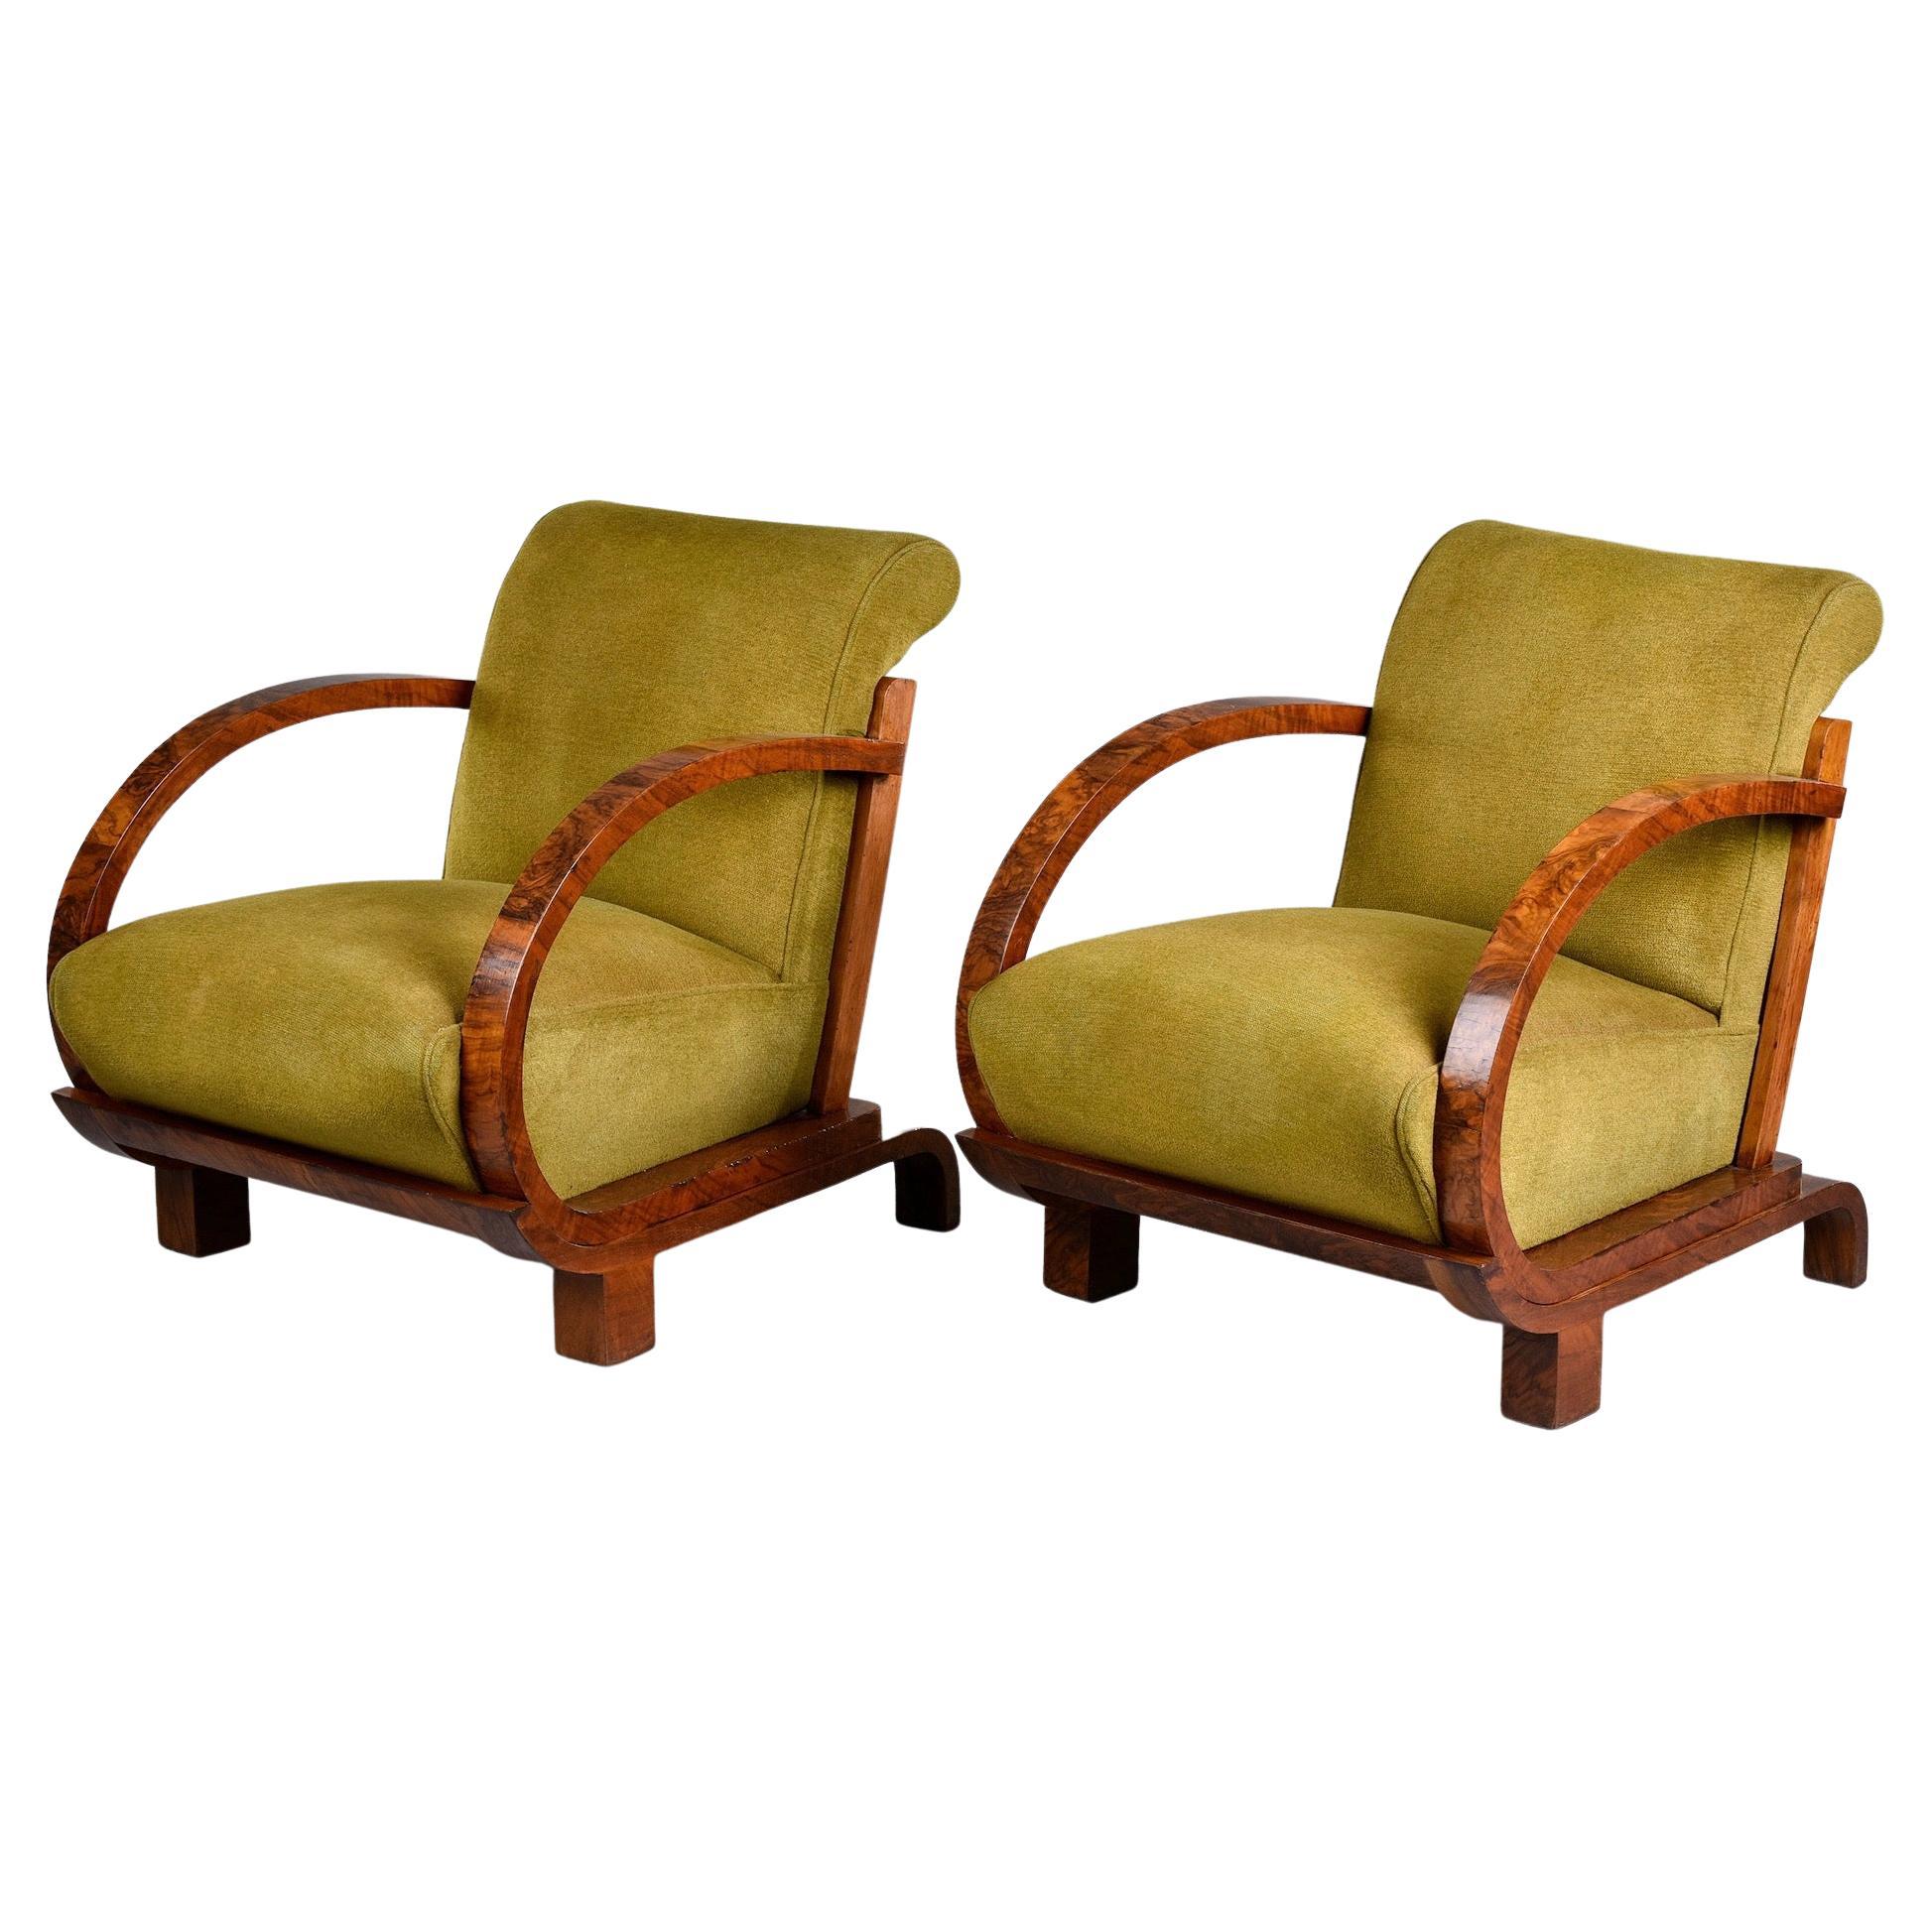 Pair French Art Deco Walnut Bentwood Armchairs with Original Upholstery